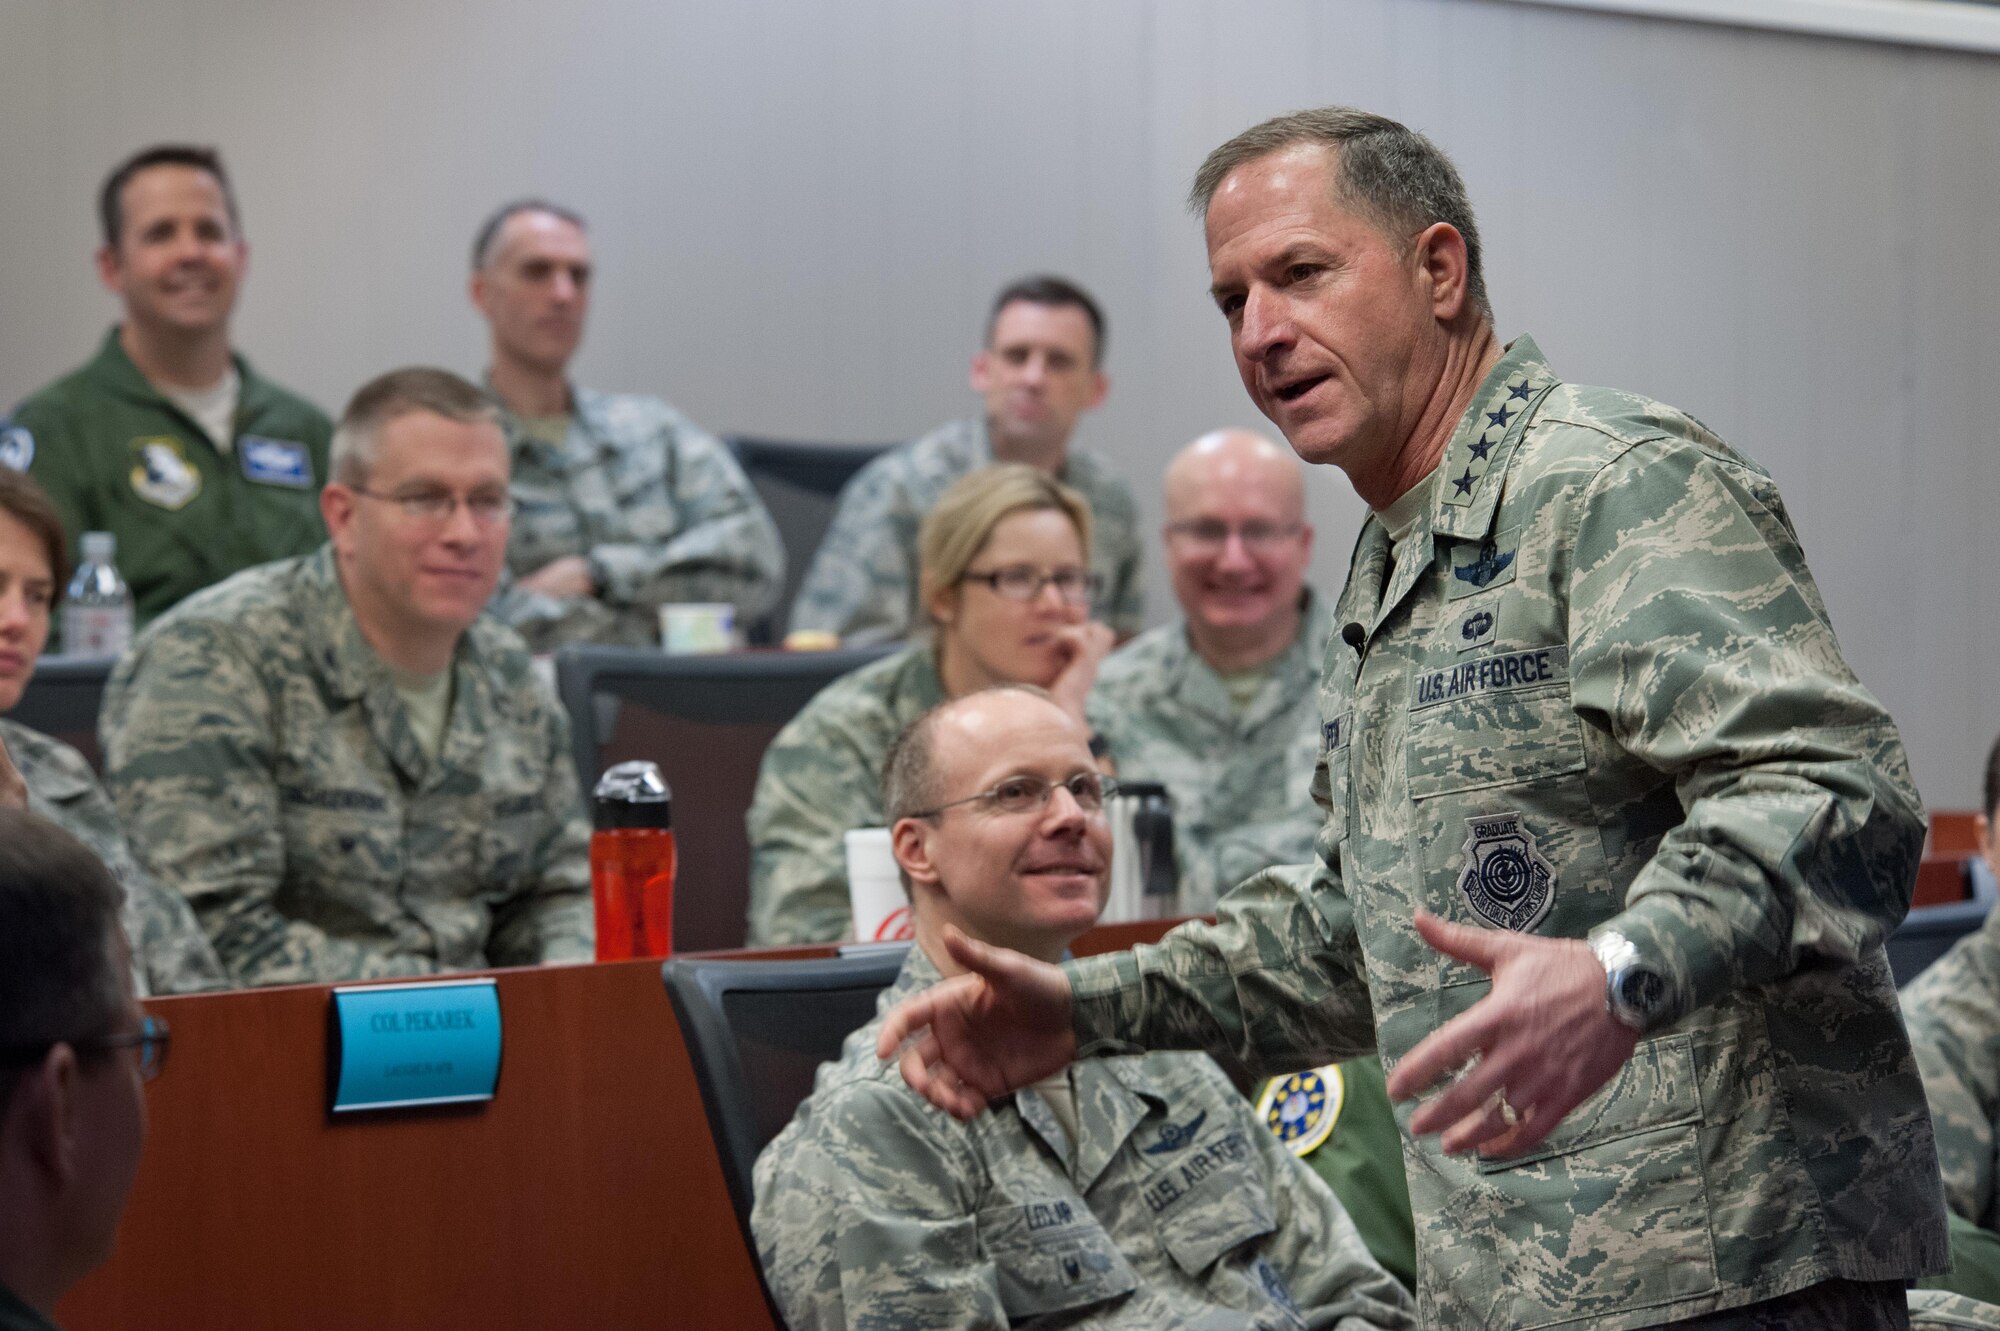 Air Force Chief of Staff Gen. David L. Goldfein addresses the Wing Commanders and Spouses courses as well as the Group Commander courses at the Eaker Center for Professional Development, Feb. 2, 2017.  Along with his mentorship opportunity with Eaker Center students, Goldfein met with Air University and Air Force Cyber College leaders. (US Air Force photo by Melanie Rodgers Cox)